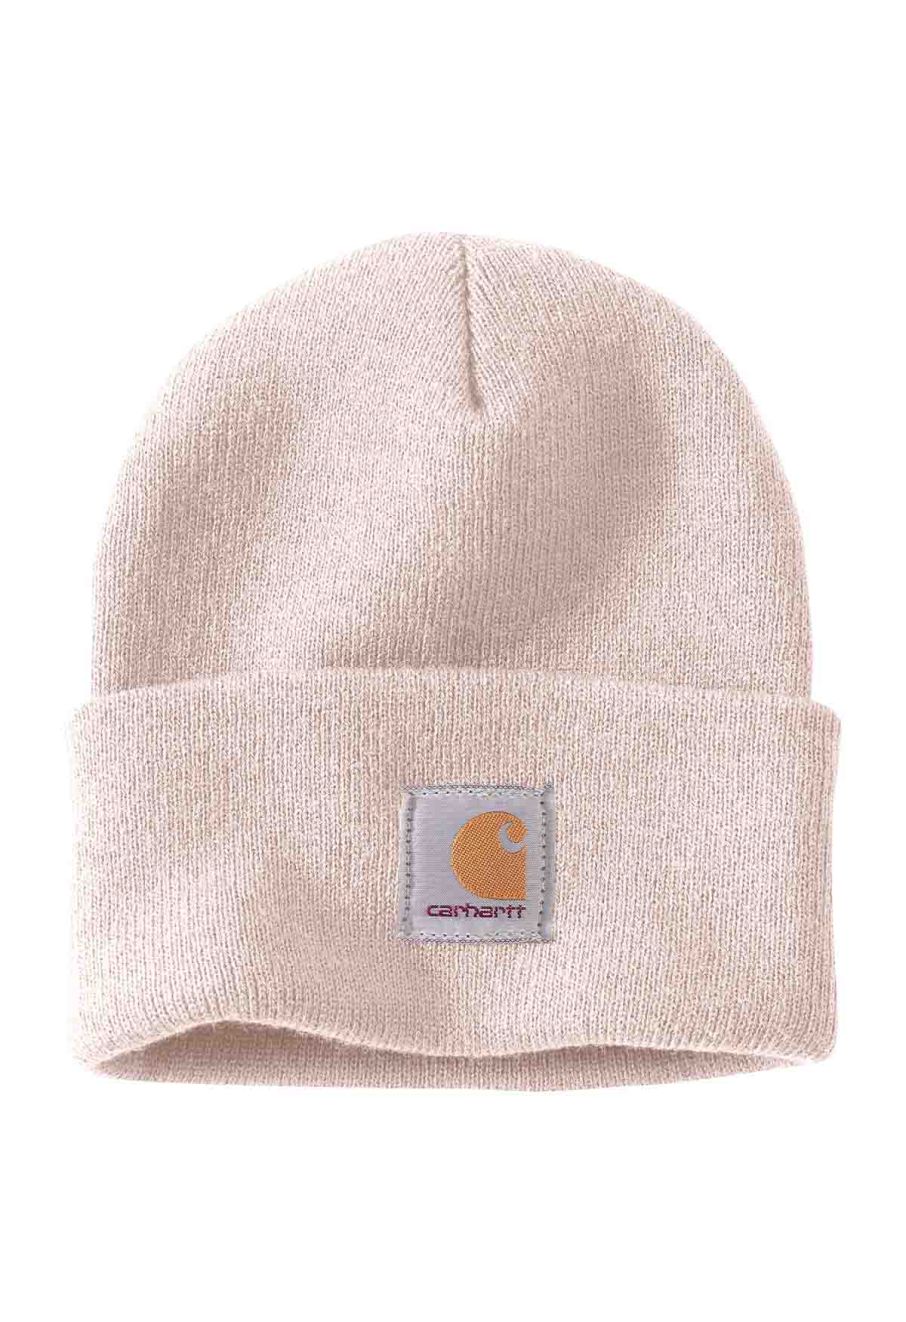 Carhartt mens Fr Fleece 2 in 1 Beanie Hat, Dark Navy, One Size US:  Clothing, Shoes & Jewelry 